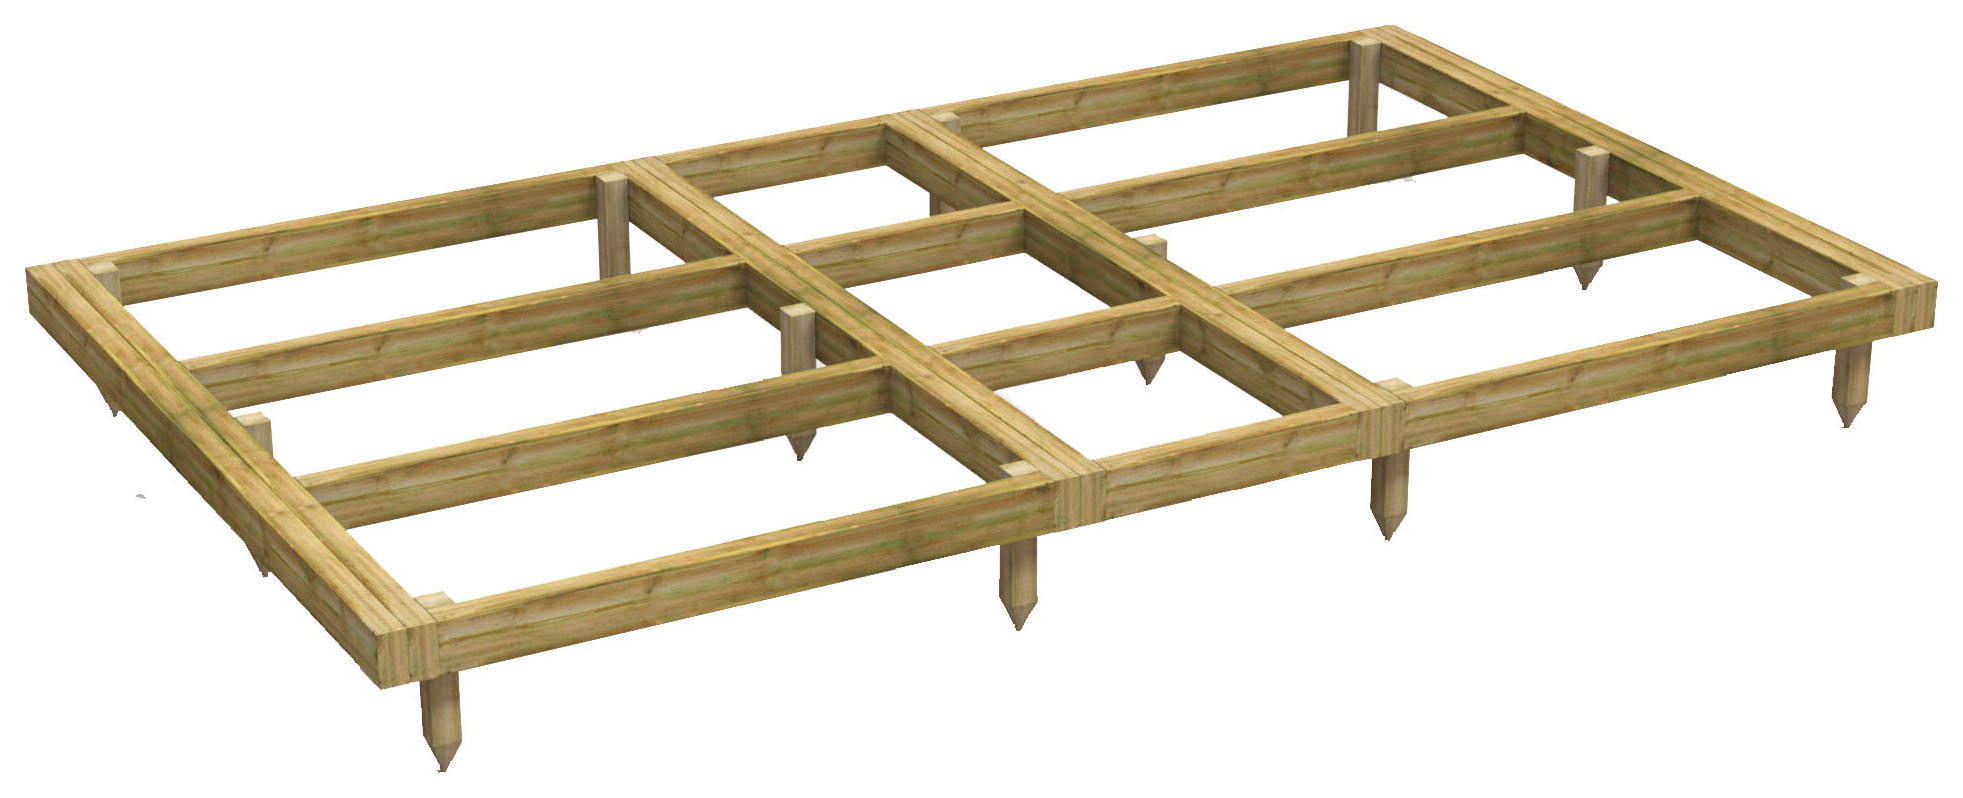 Power Sheds Pressure Treated Garden Building Base Kit - 10 x 6ft